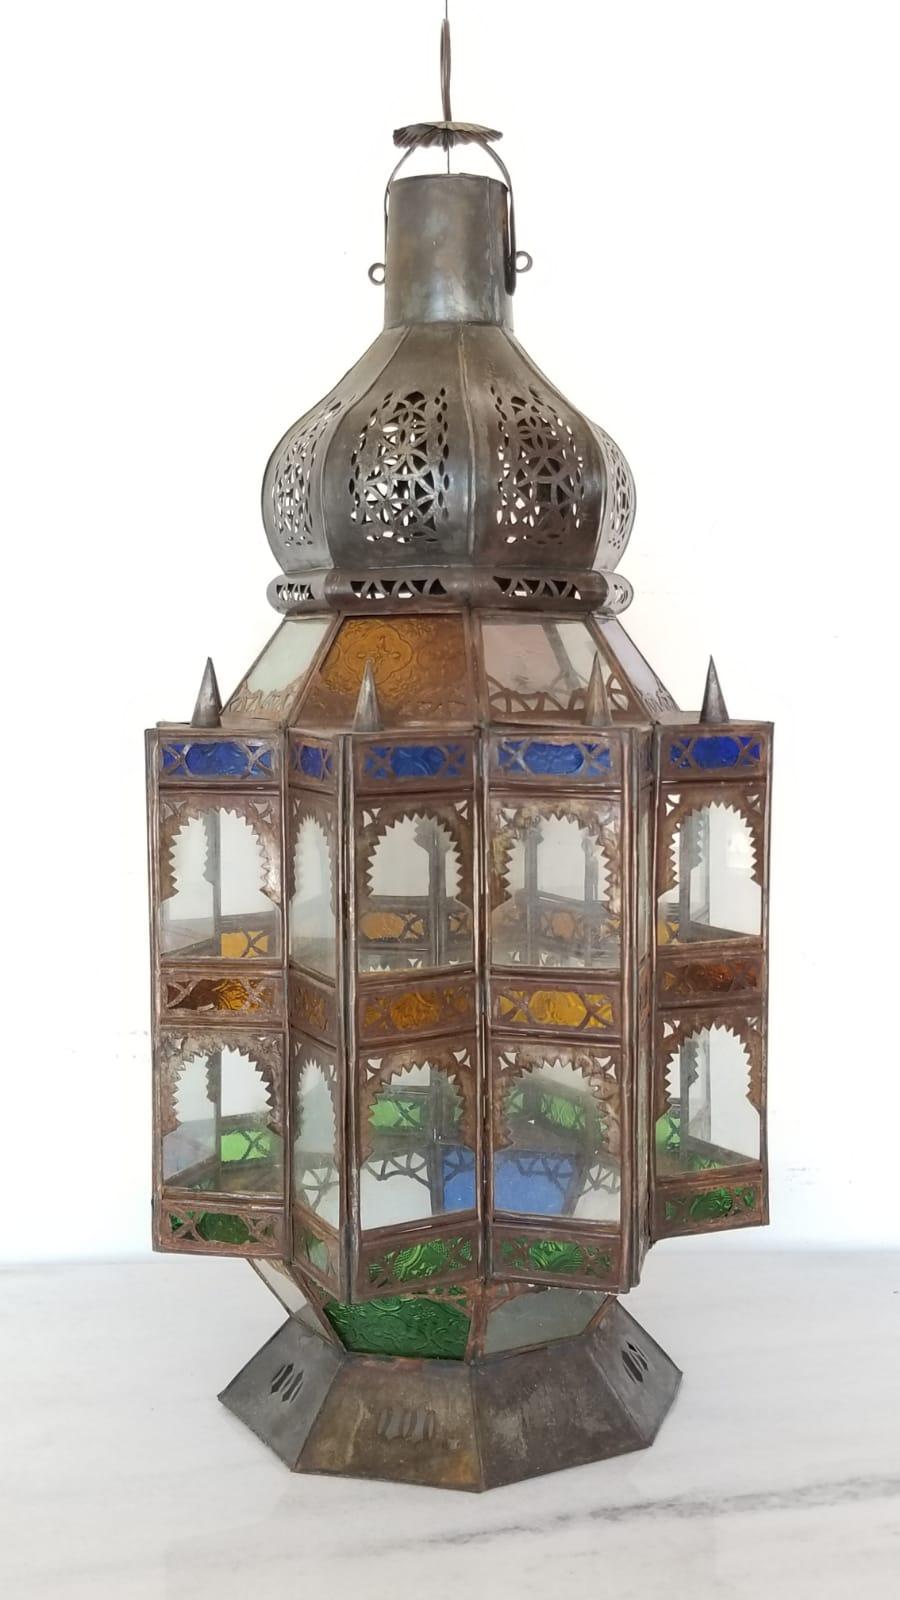 Superb Moroccan rustic lantern chandelier with bottom and can be electrified great workmanship, all handmade. A great piece for indoor or outdoor. The lantern come with frosted glass and multi-color Moorish glass amber, blue and green.